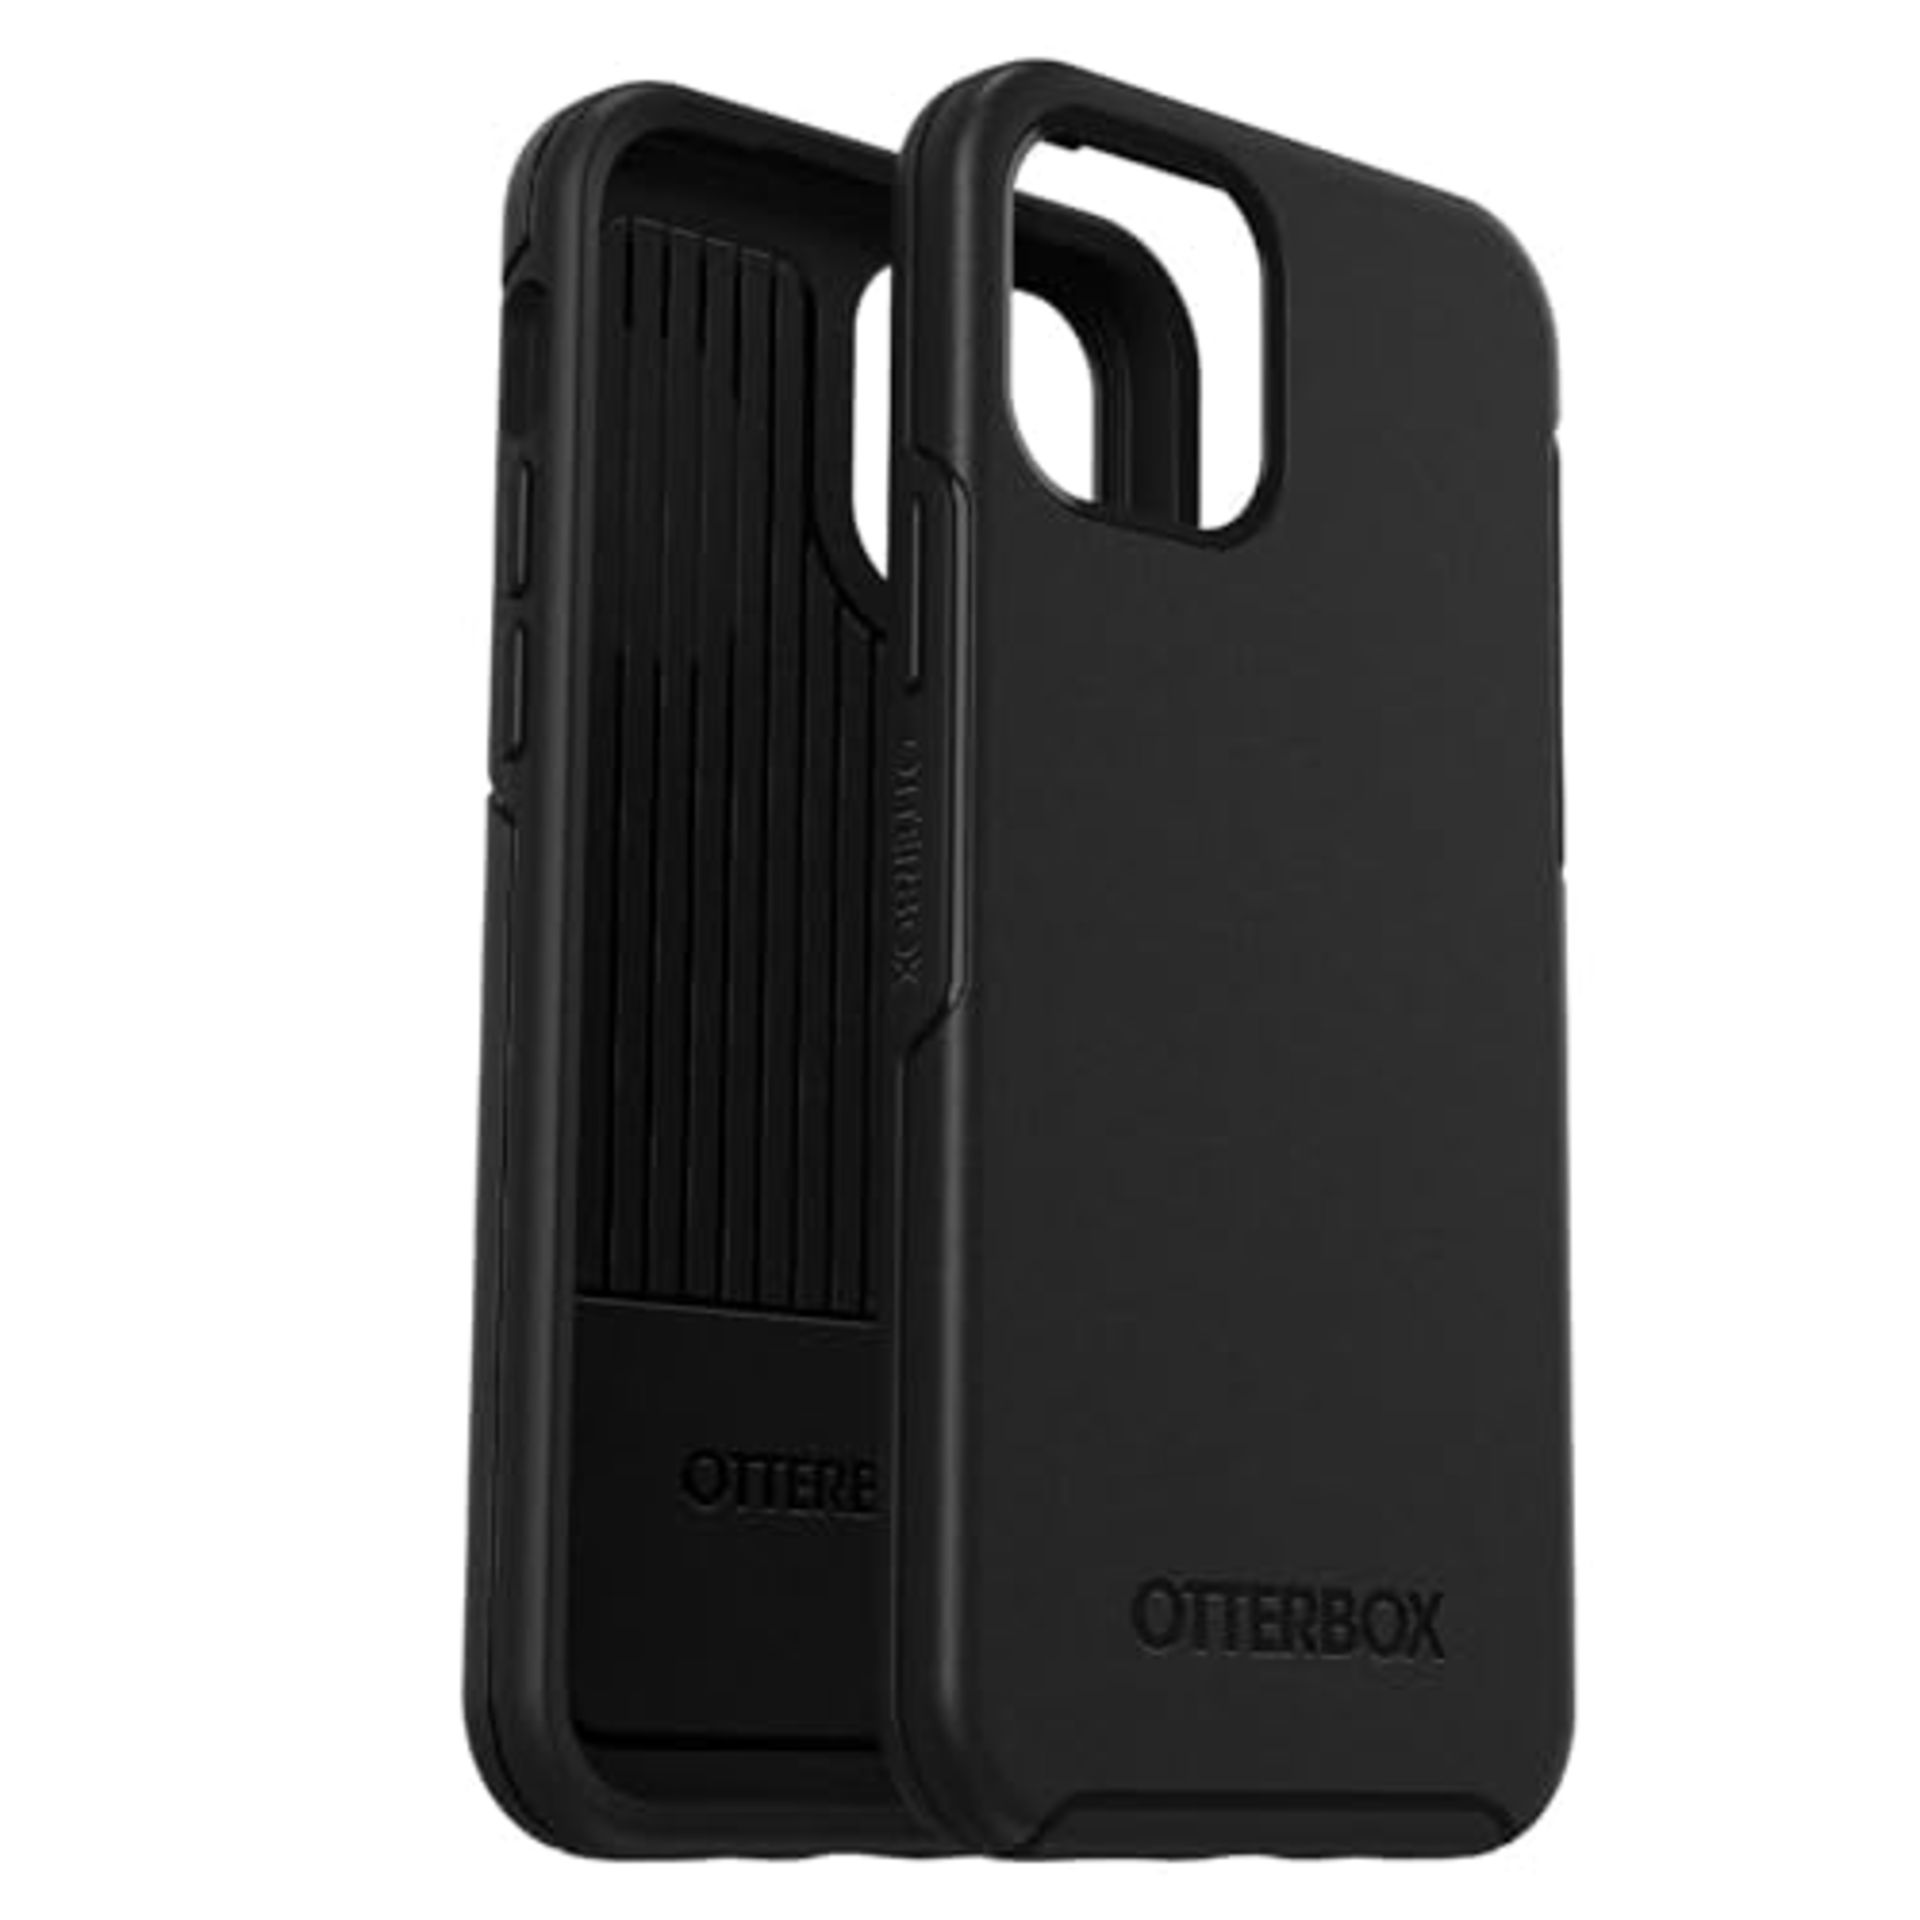 OtterBox Symmetry Case for iPhone 12 / iPhone 12 Pro, Shockproof, Drop proof, Protecti